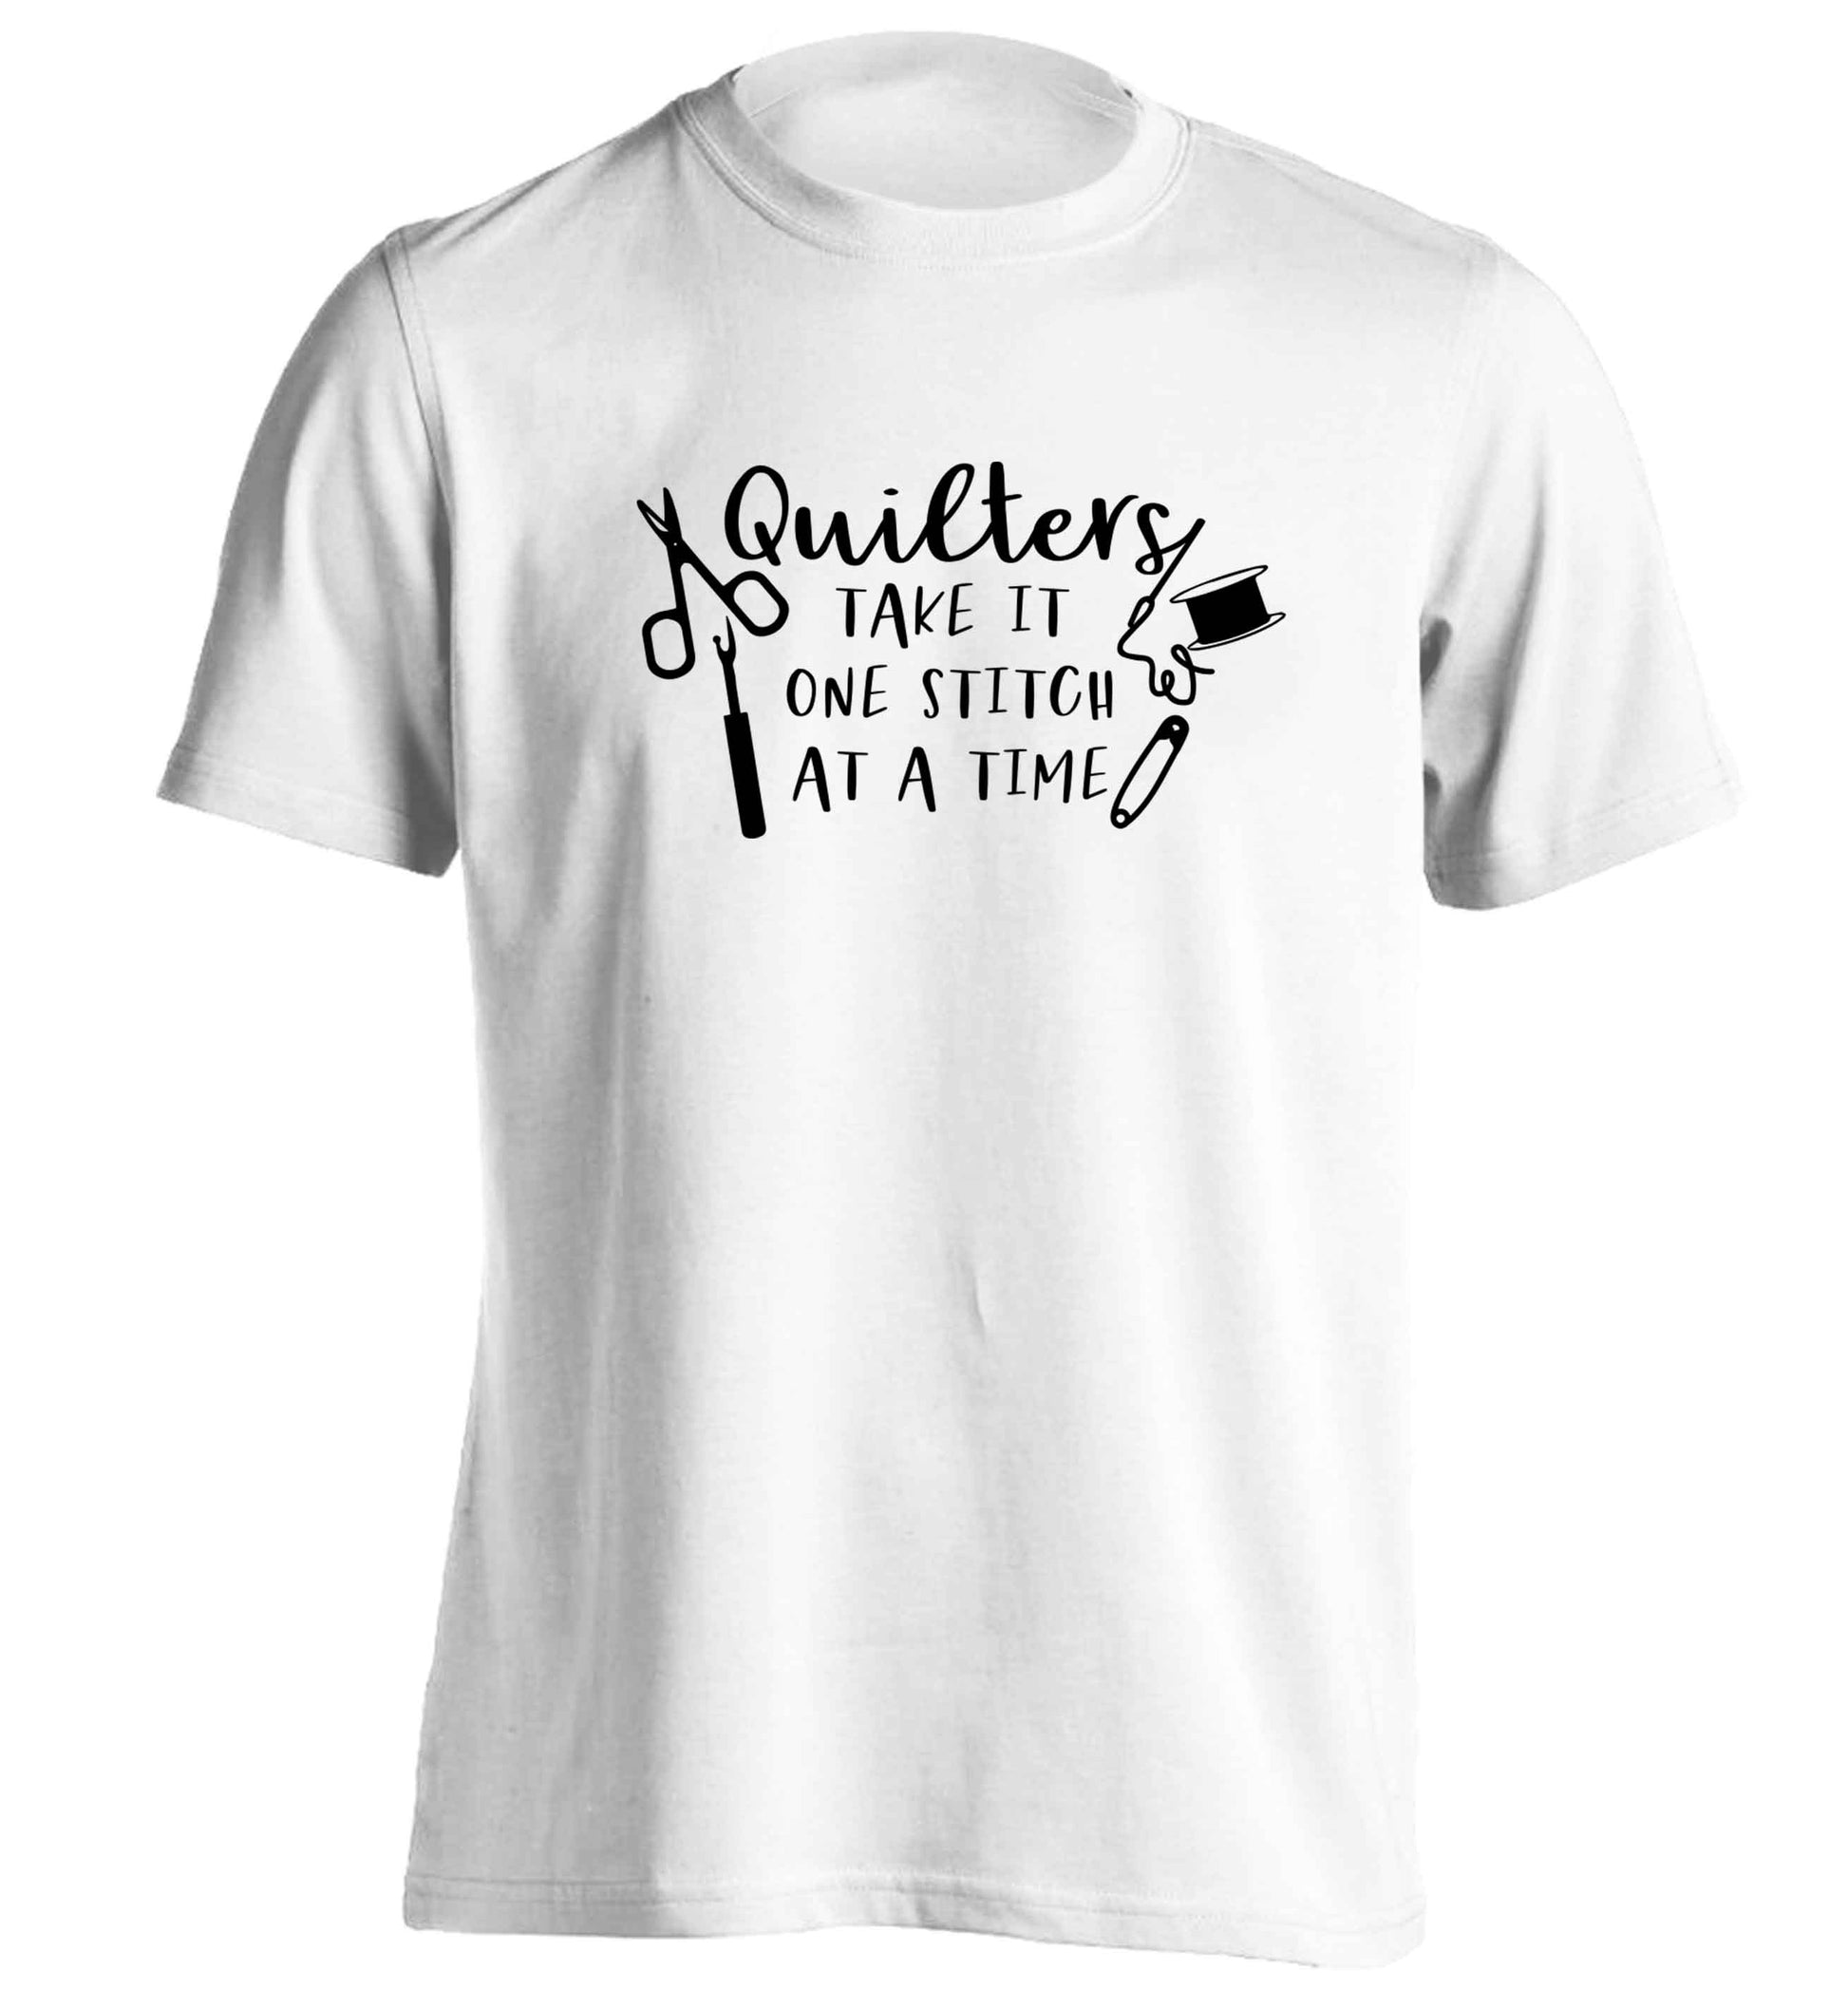 Quilters take it one stitch at a time  adults unisex white Tshirt 2XL